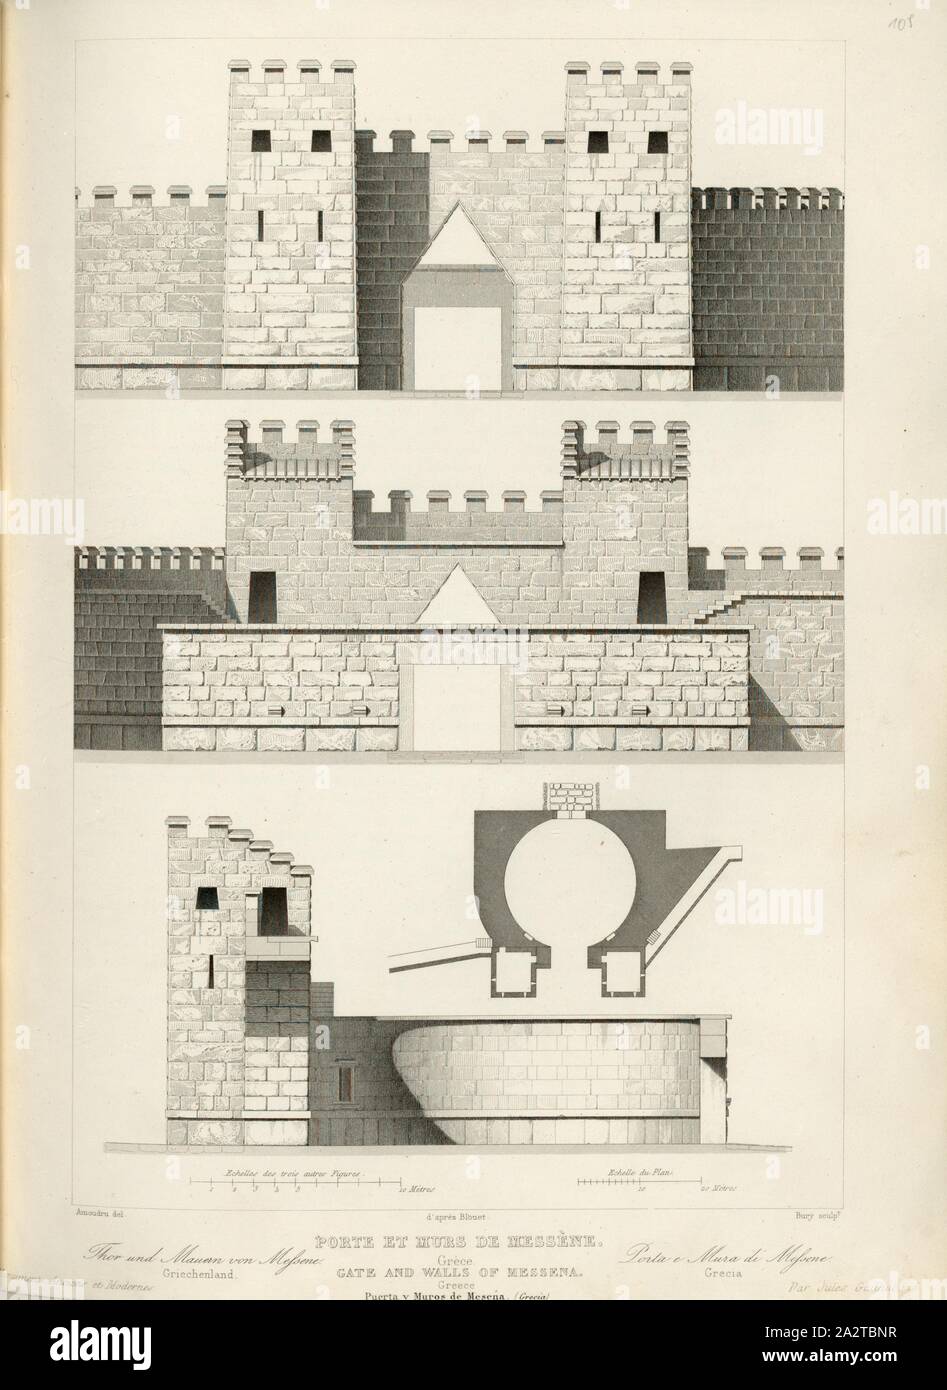 Gate and walls of Messene, City gate and walls in Messene Greece, signed: Amoudru (del.); Bury (sculp.), Fig. 63, p. 281, Amourdru (del.); Bury (sc.), 1853, Jules Gailhabaud: Monuments anciens et modernes. Bd. 1. Paris: Librairie de Firmin Didot frères, 1853 Stock Photo